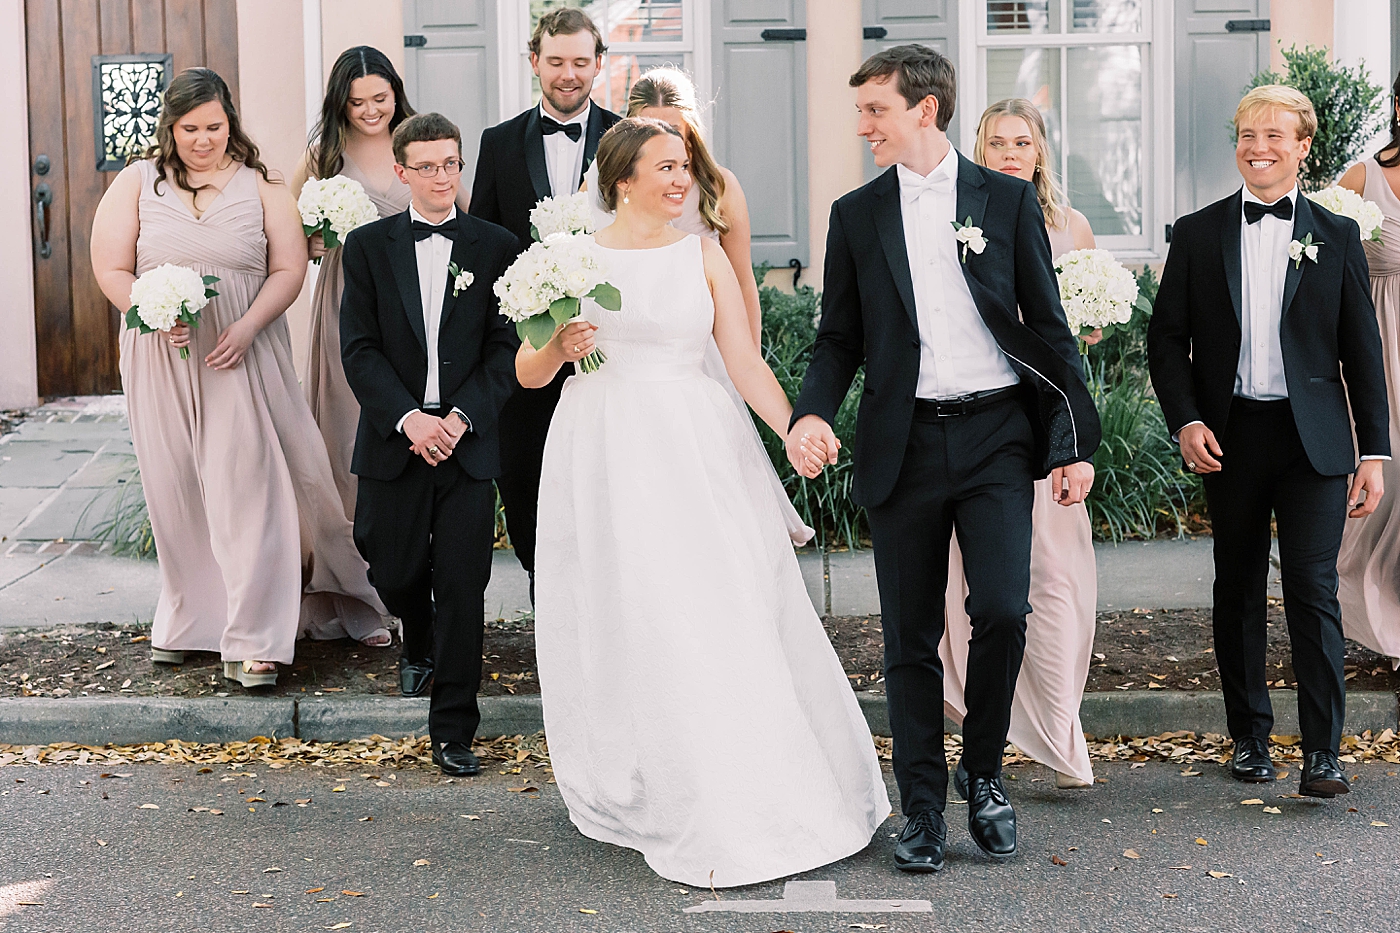 Bride and groom with their wedding party during their Intimate spring wedding | Carters Event Co